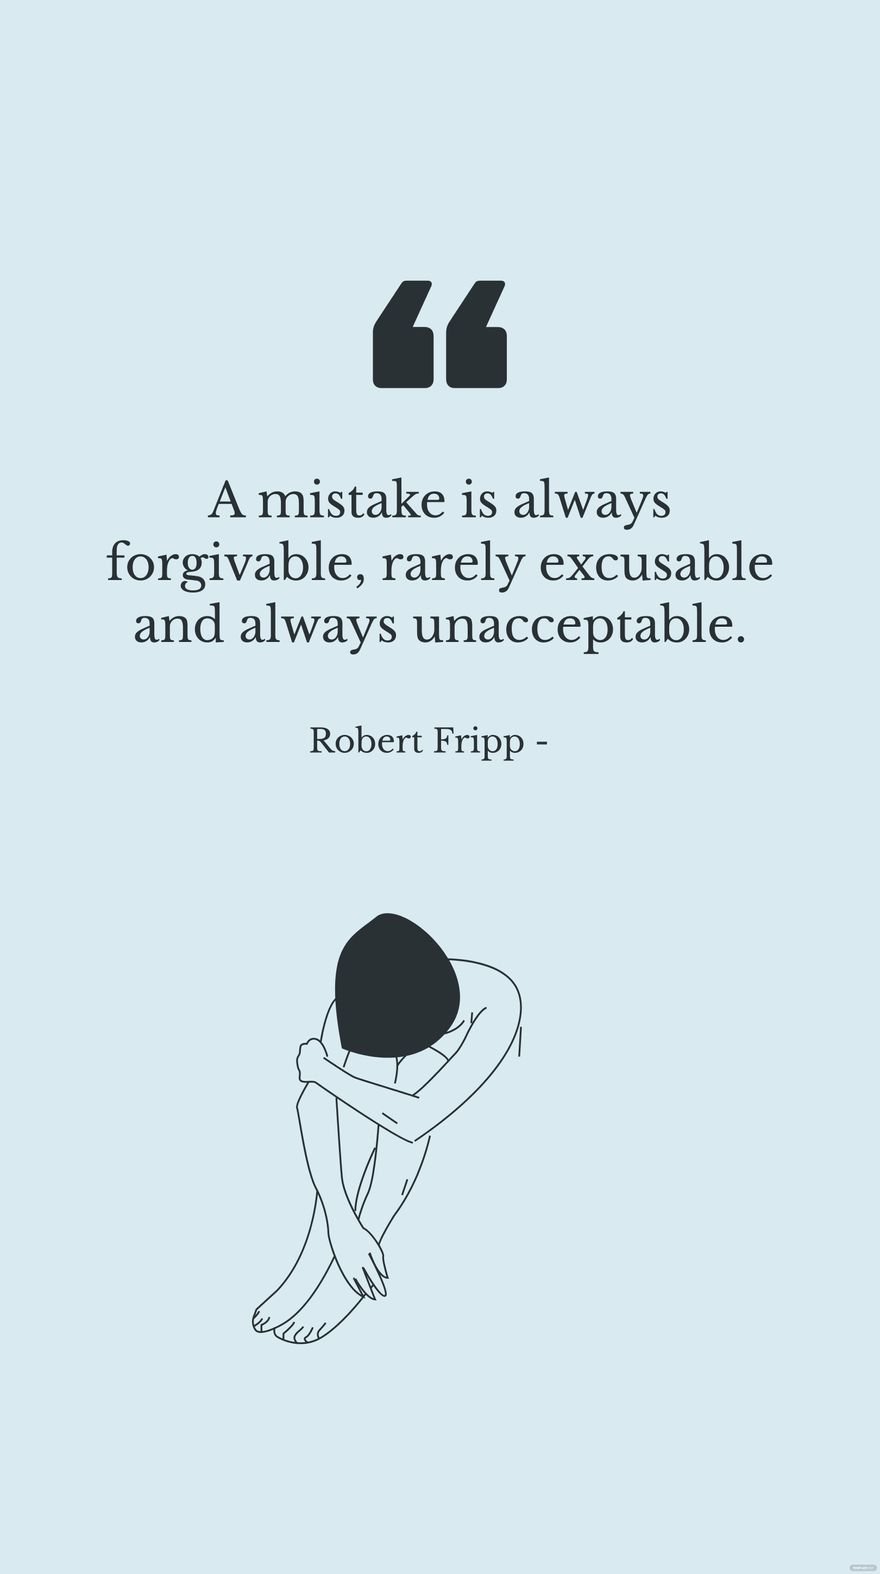 Free Robert Fripp - A mistake is always forgivable, rarely excusable and always unacceptable.